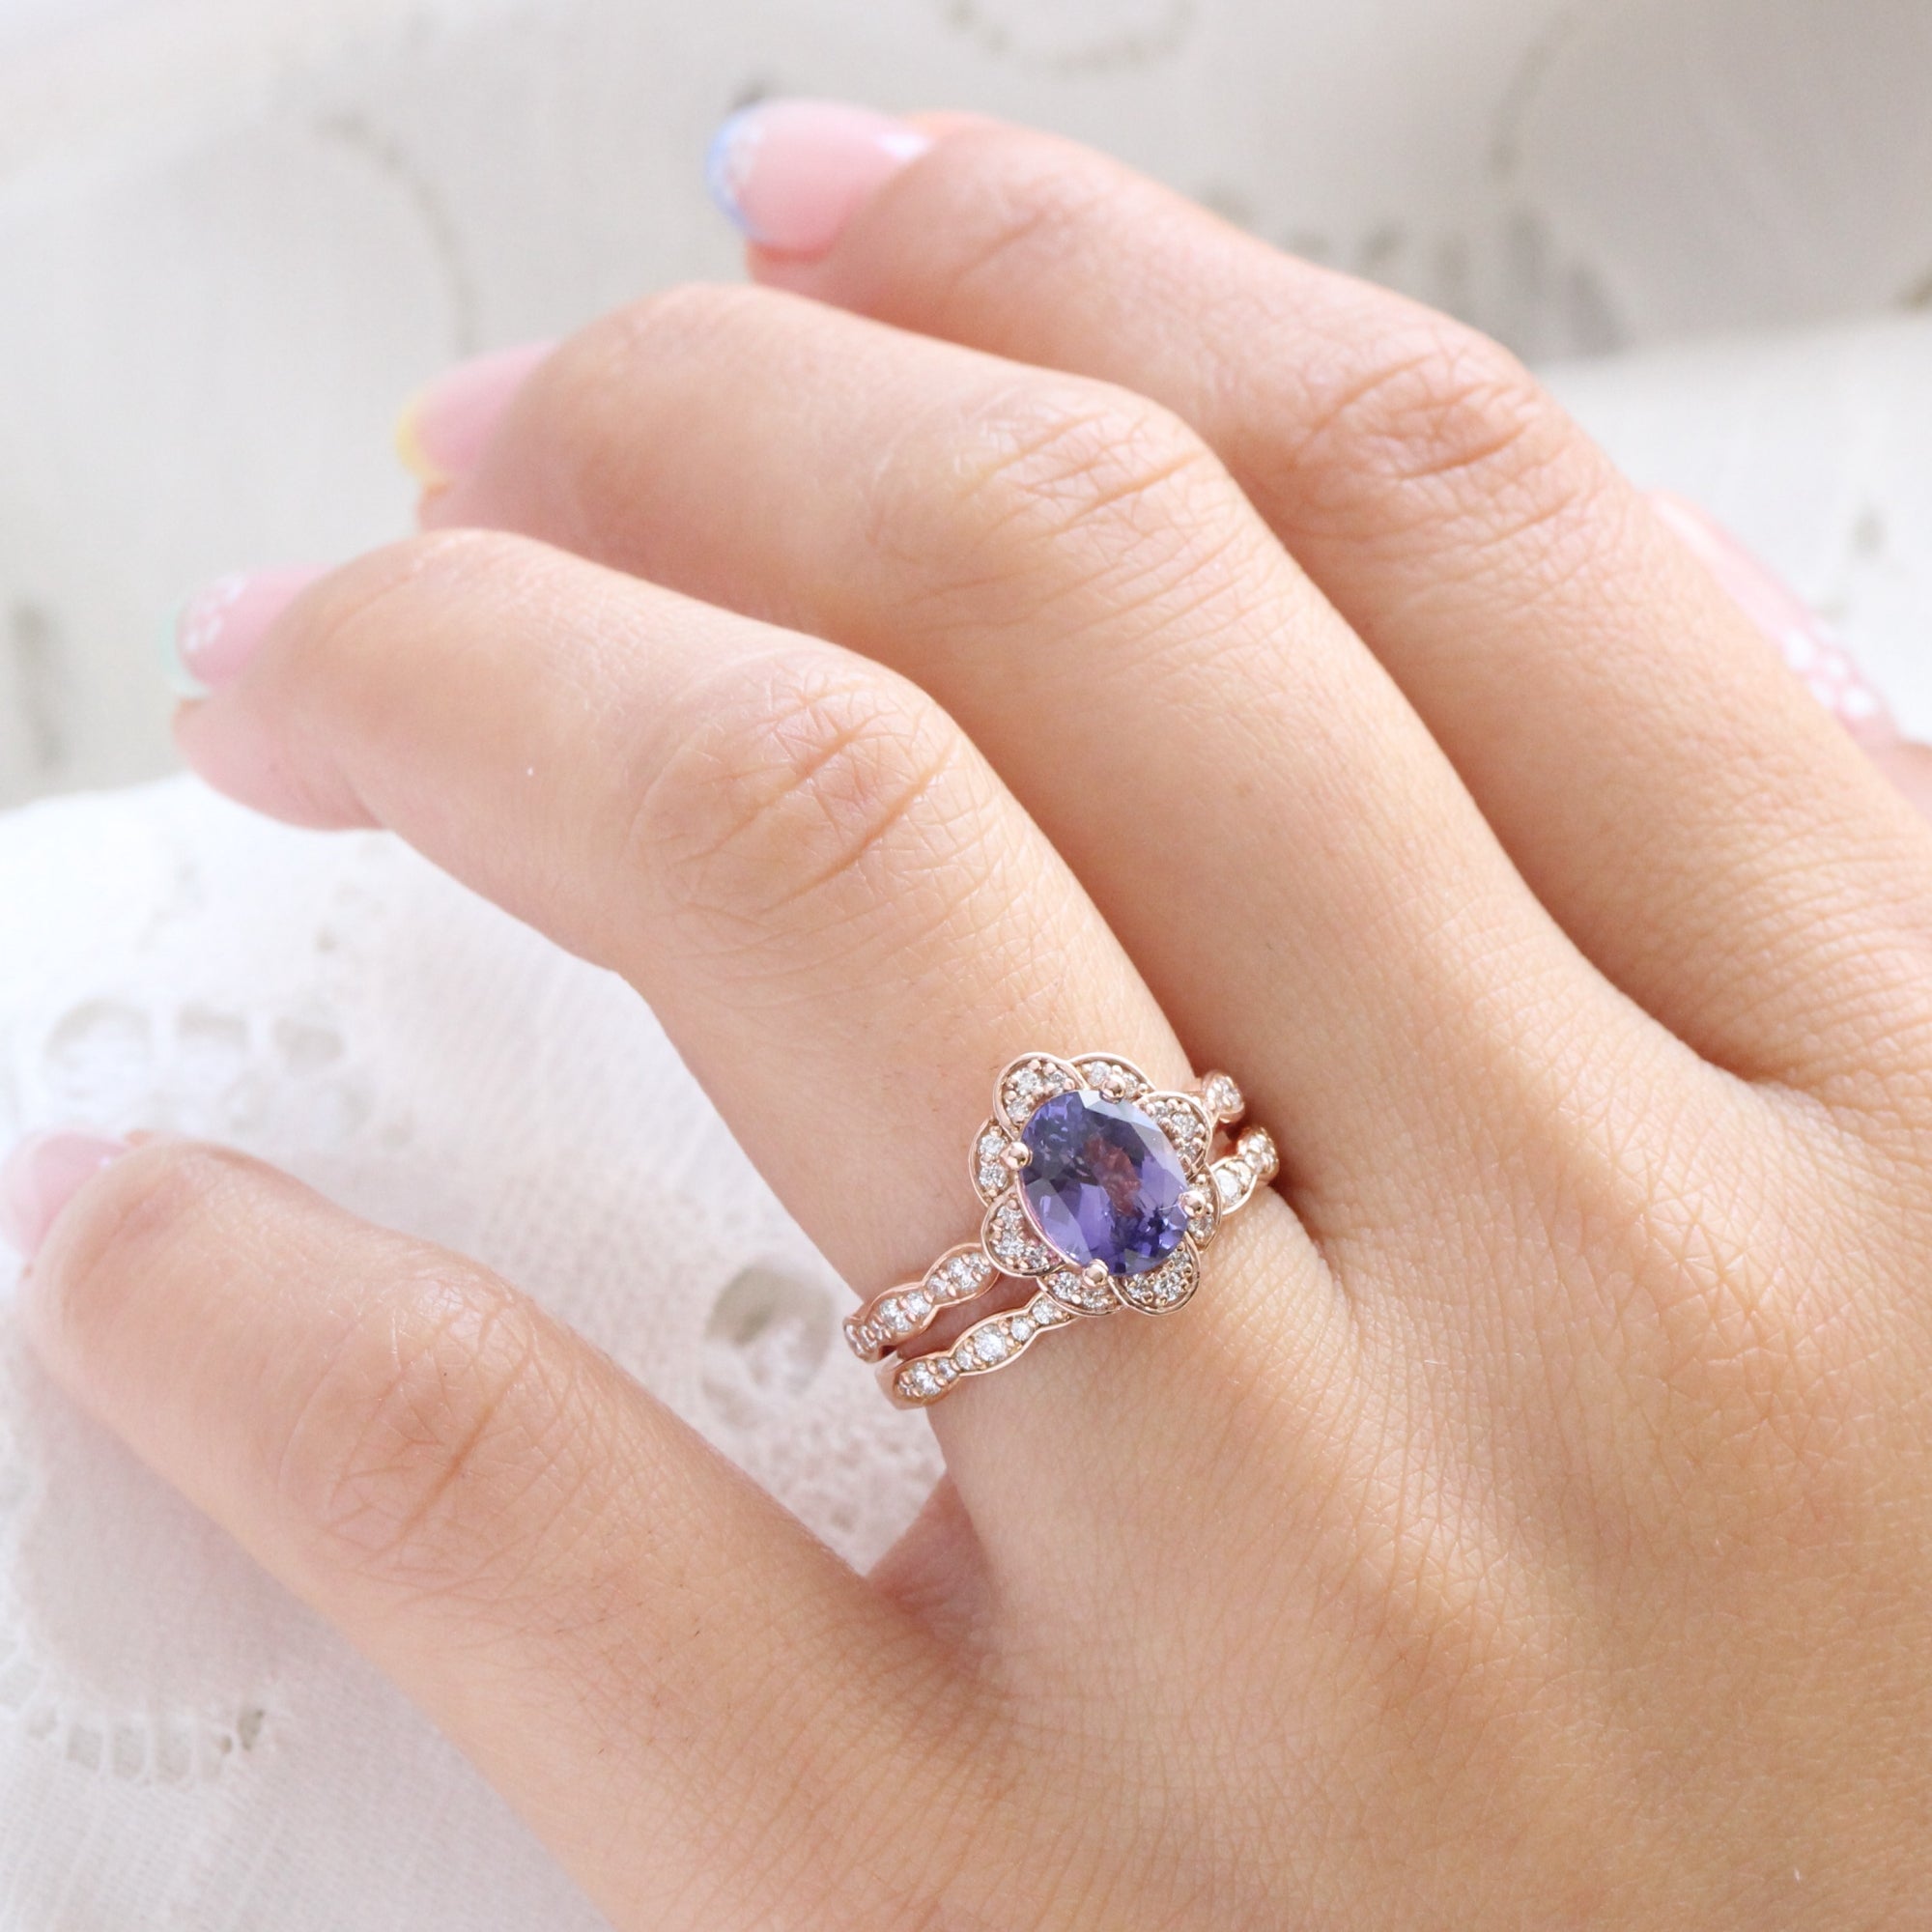 Oval purple sapphire diamond ring rose gold vintage floral sapphire ring la more design jewelry